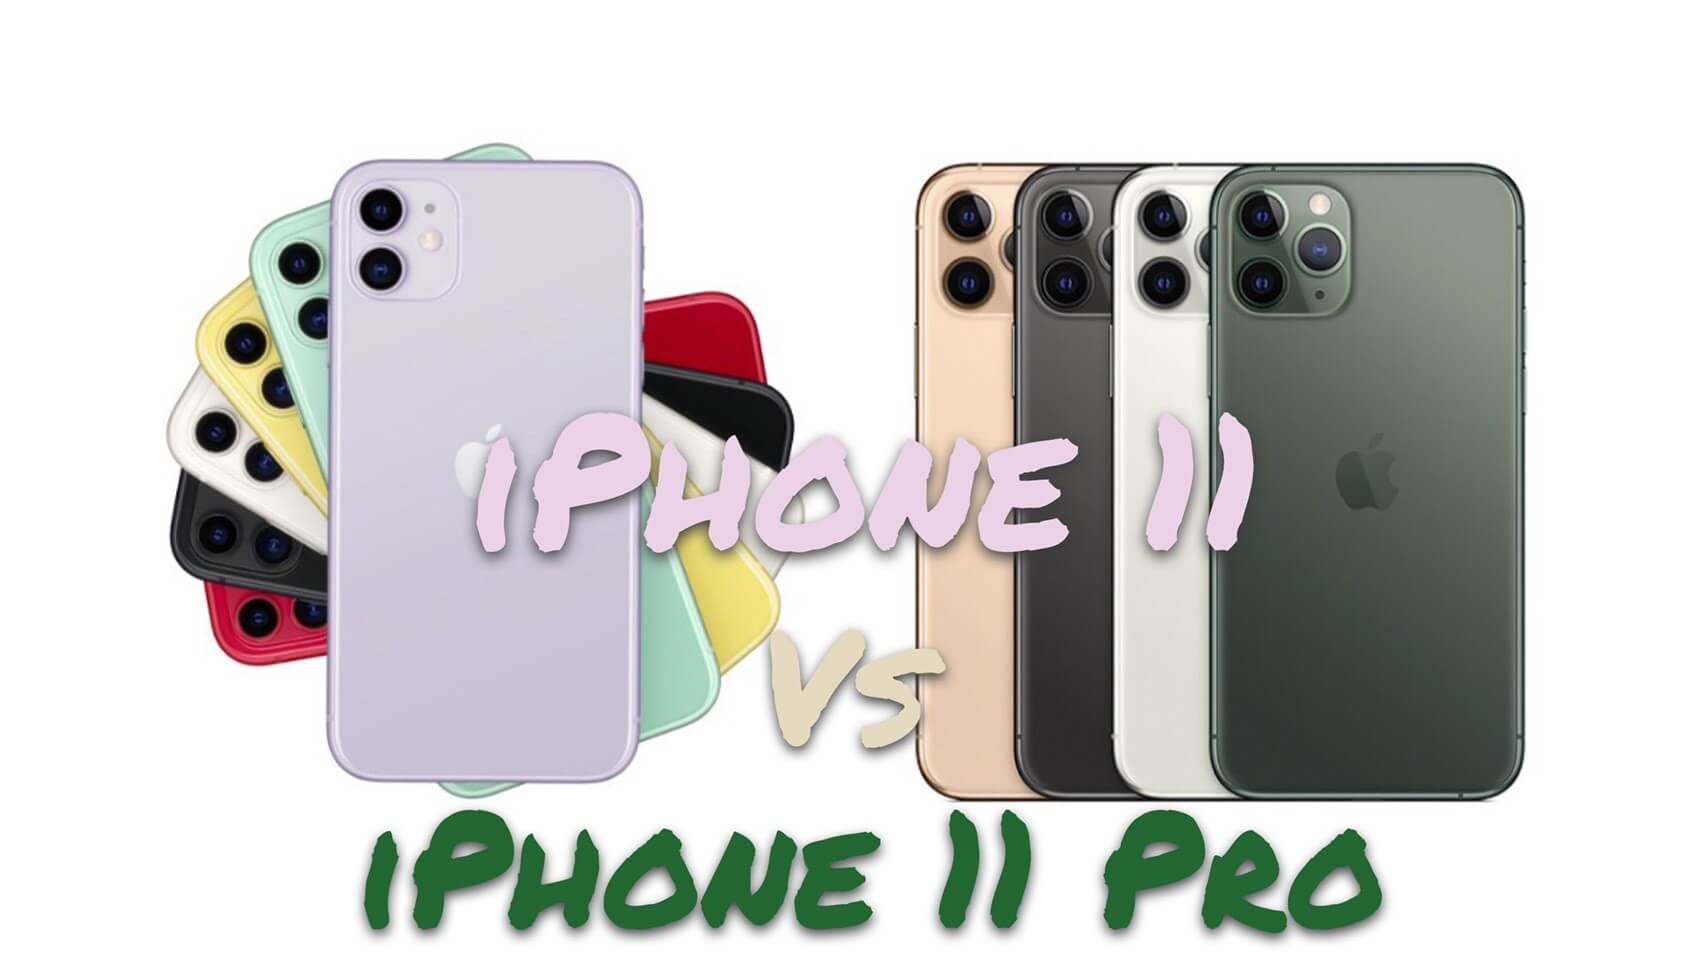 iPhone11、iPhone 11 Pro、iPhone 11 Pro Max 好難選擇？